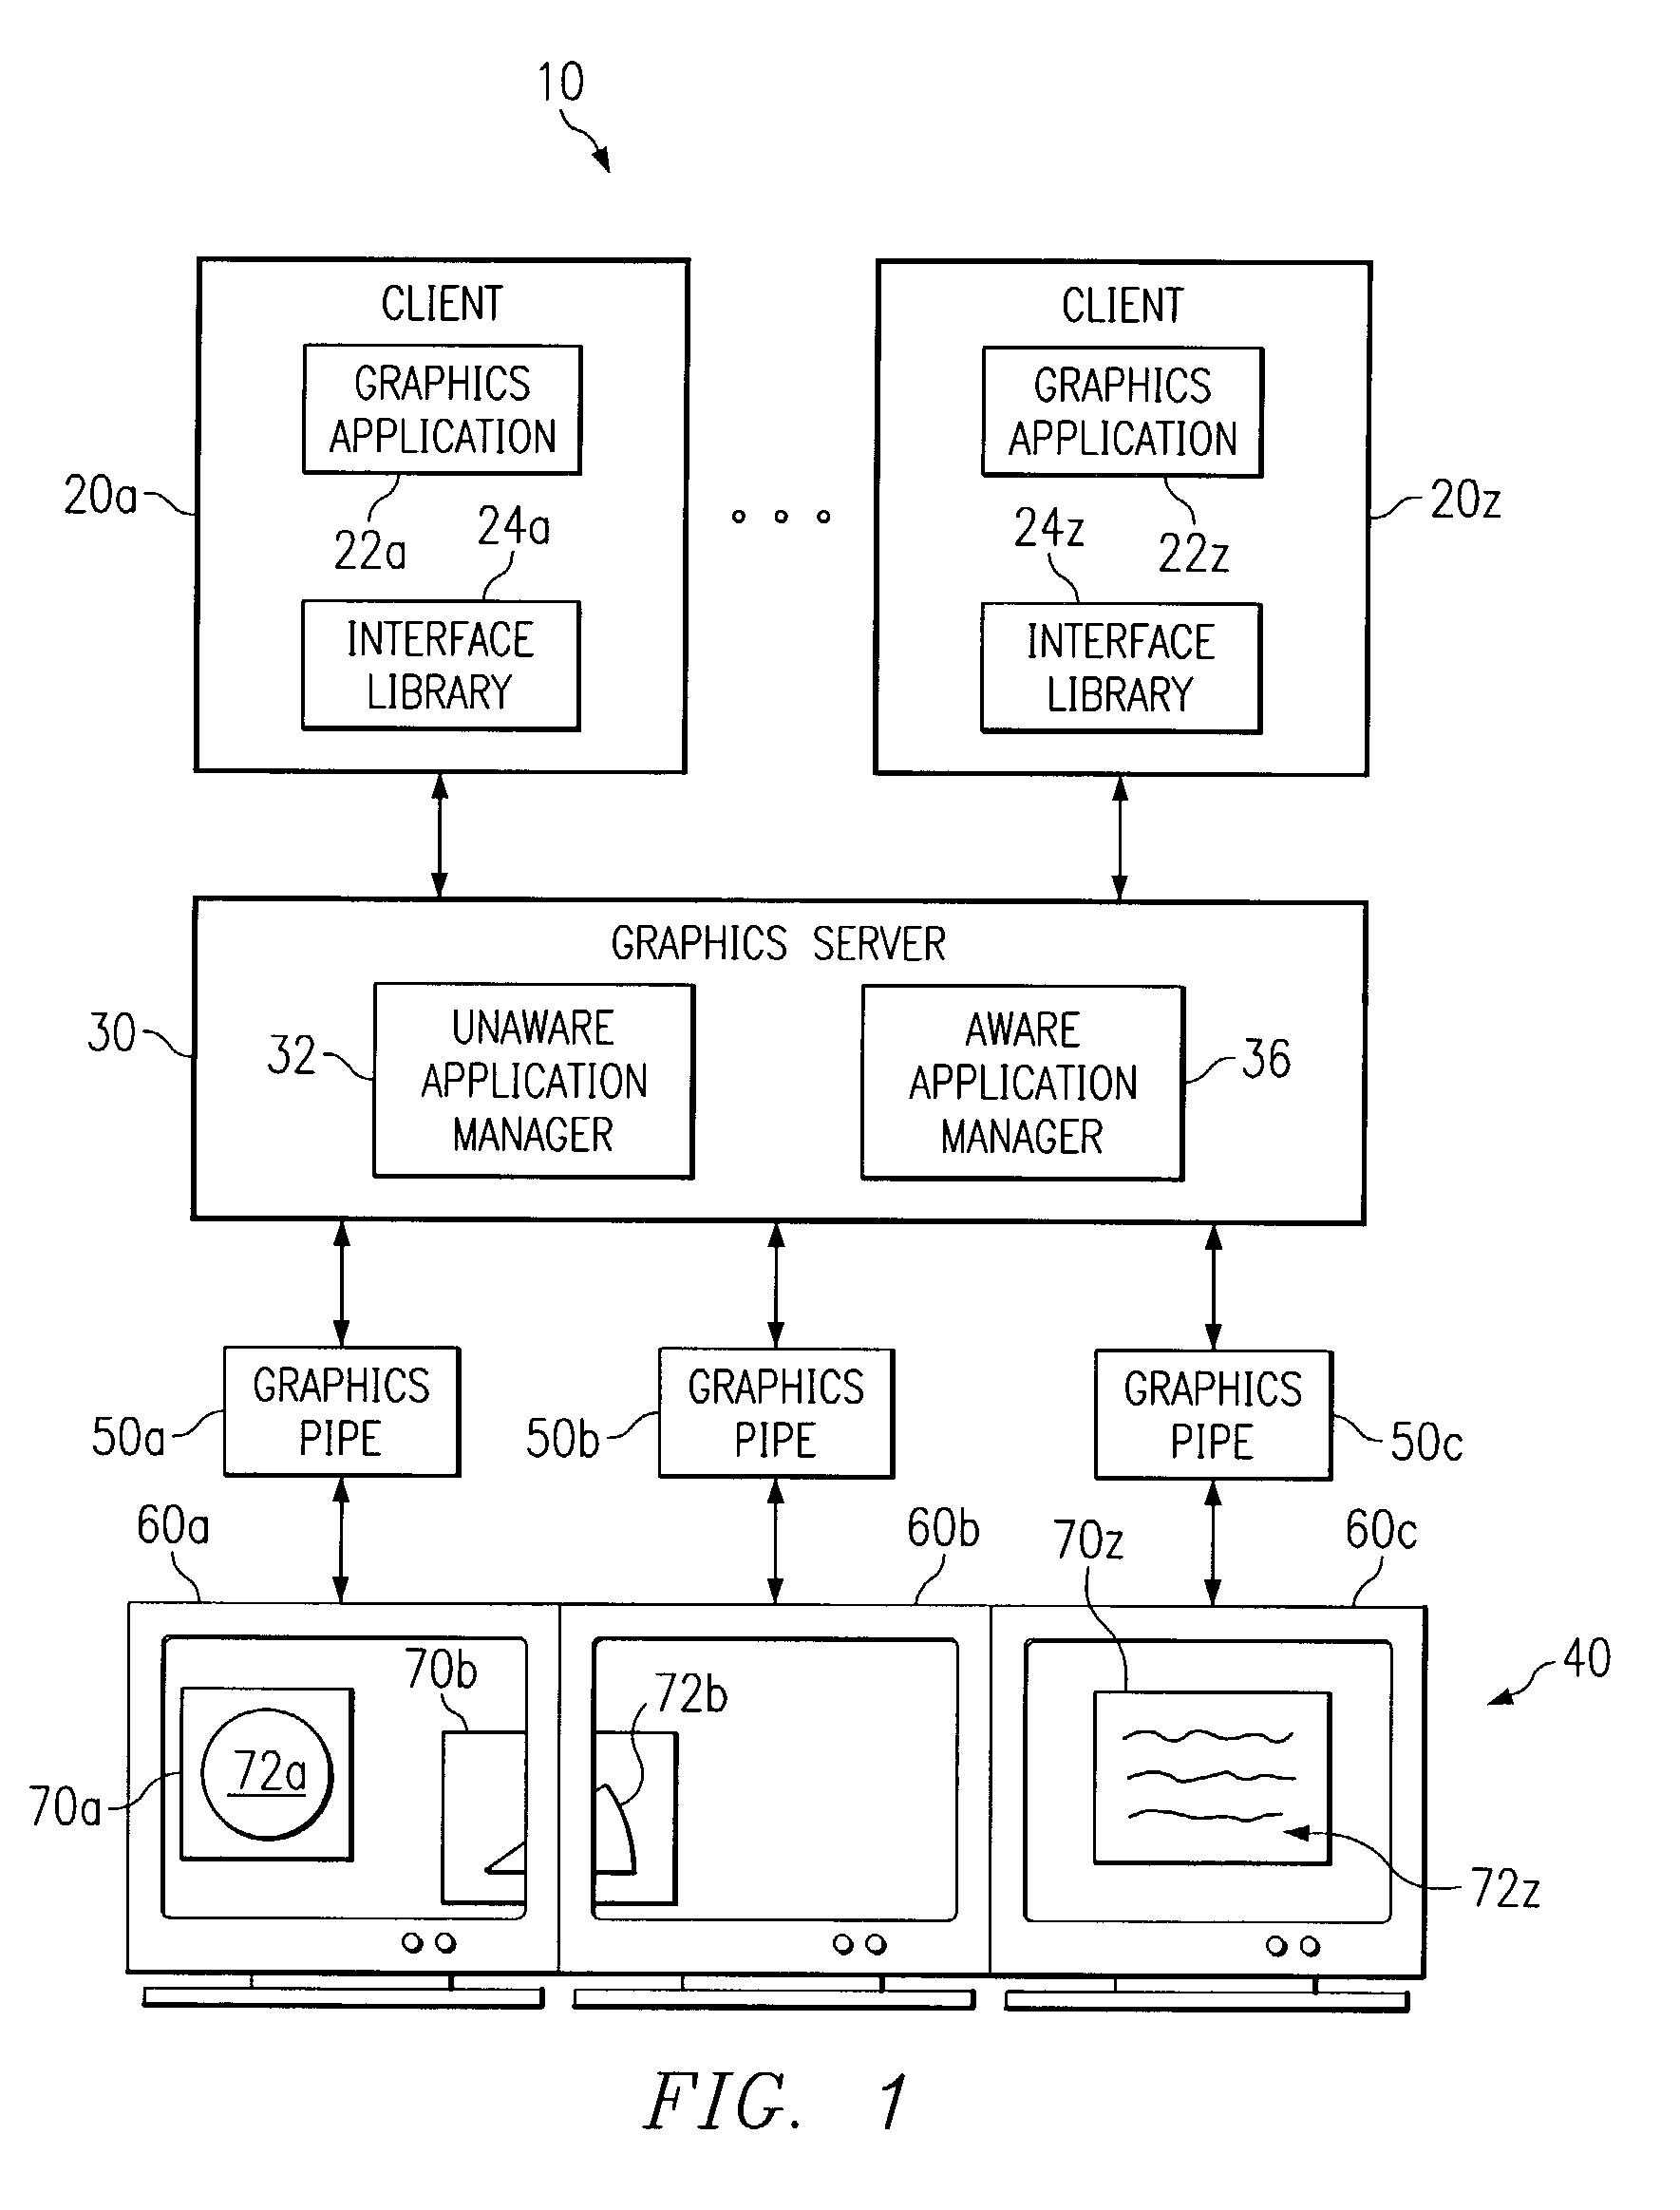 System and method for managing graphics applications